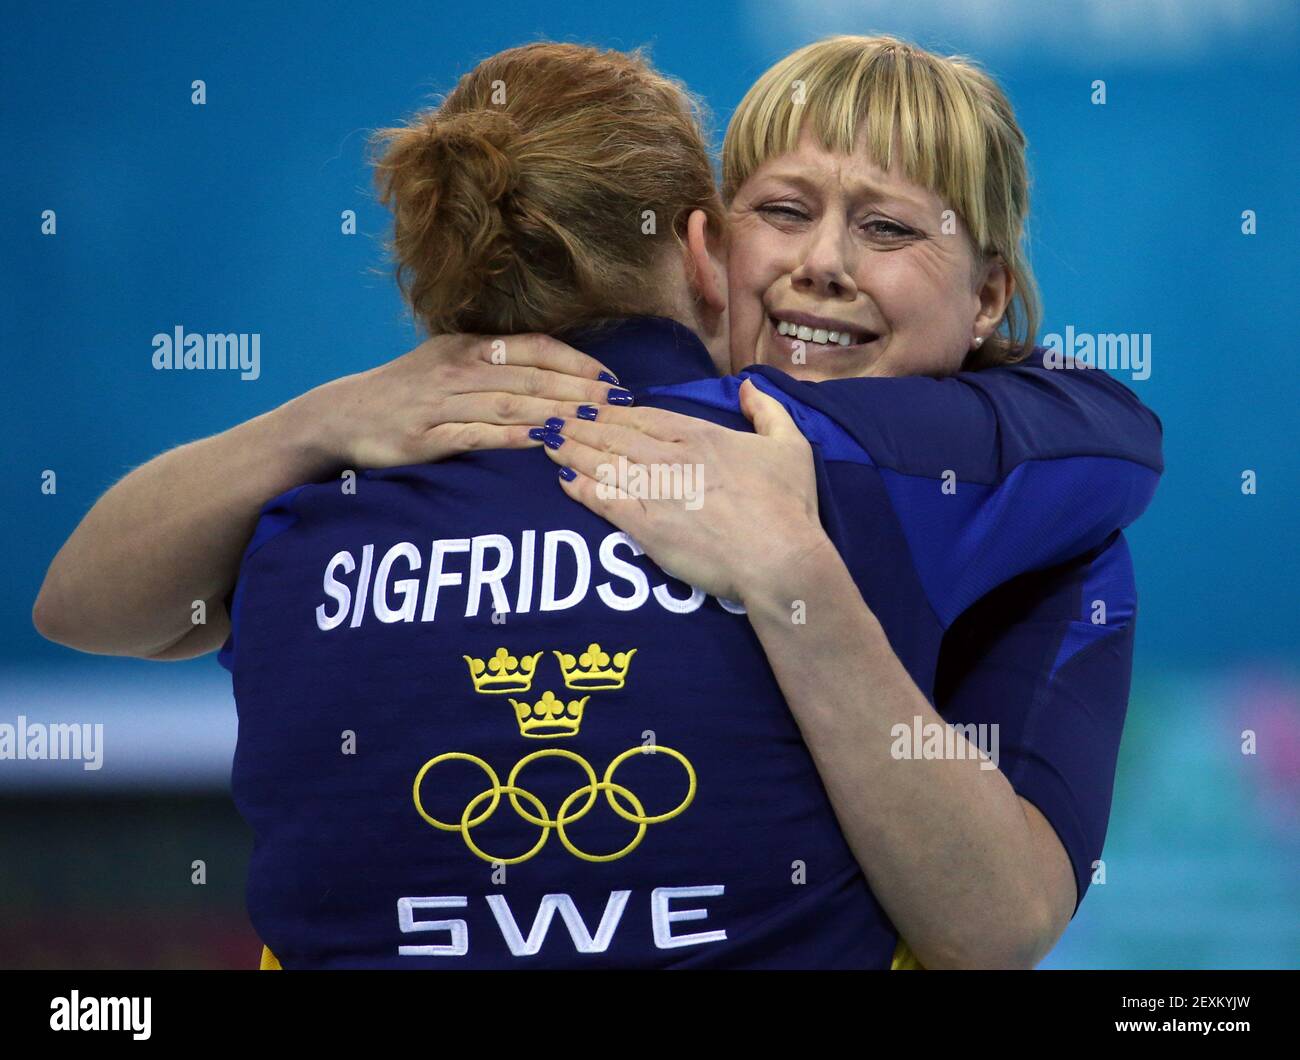 Sweden's Margaretha Sigfriedsson (left) and Maria Prytz celebrate their victory over Switzerland during women's curling semifinals at the Ice Cube Curling Center during the Winter Olympics in Sochi, Russia, Wednesday, Feb. 19, 2014. (Photo by Brian Cassella/Chicago Tribune/MCT/Sipa USA) Stock Photo